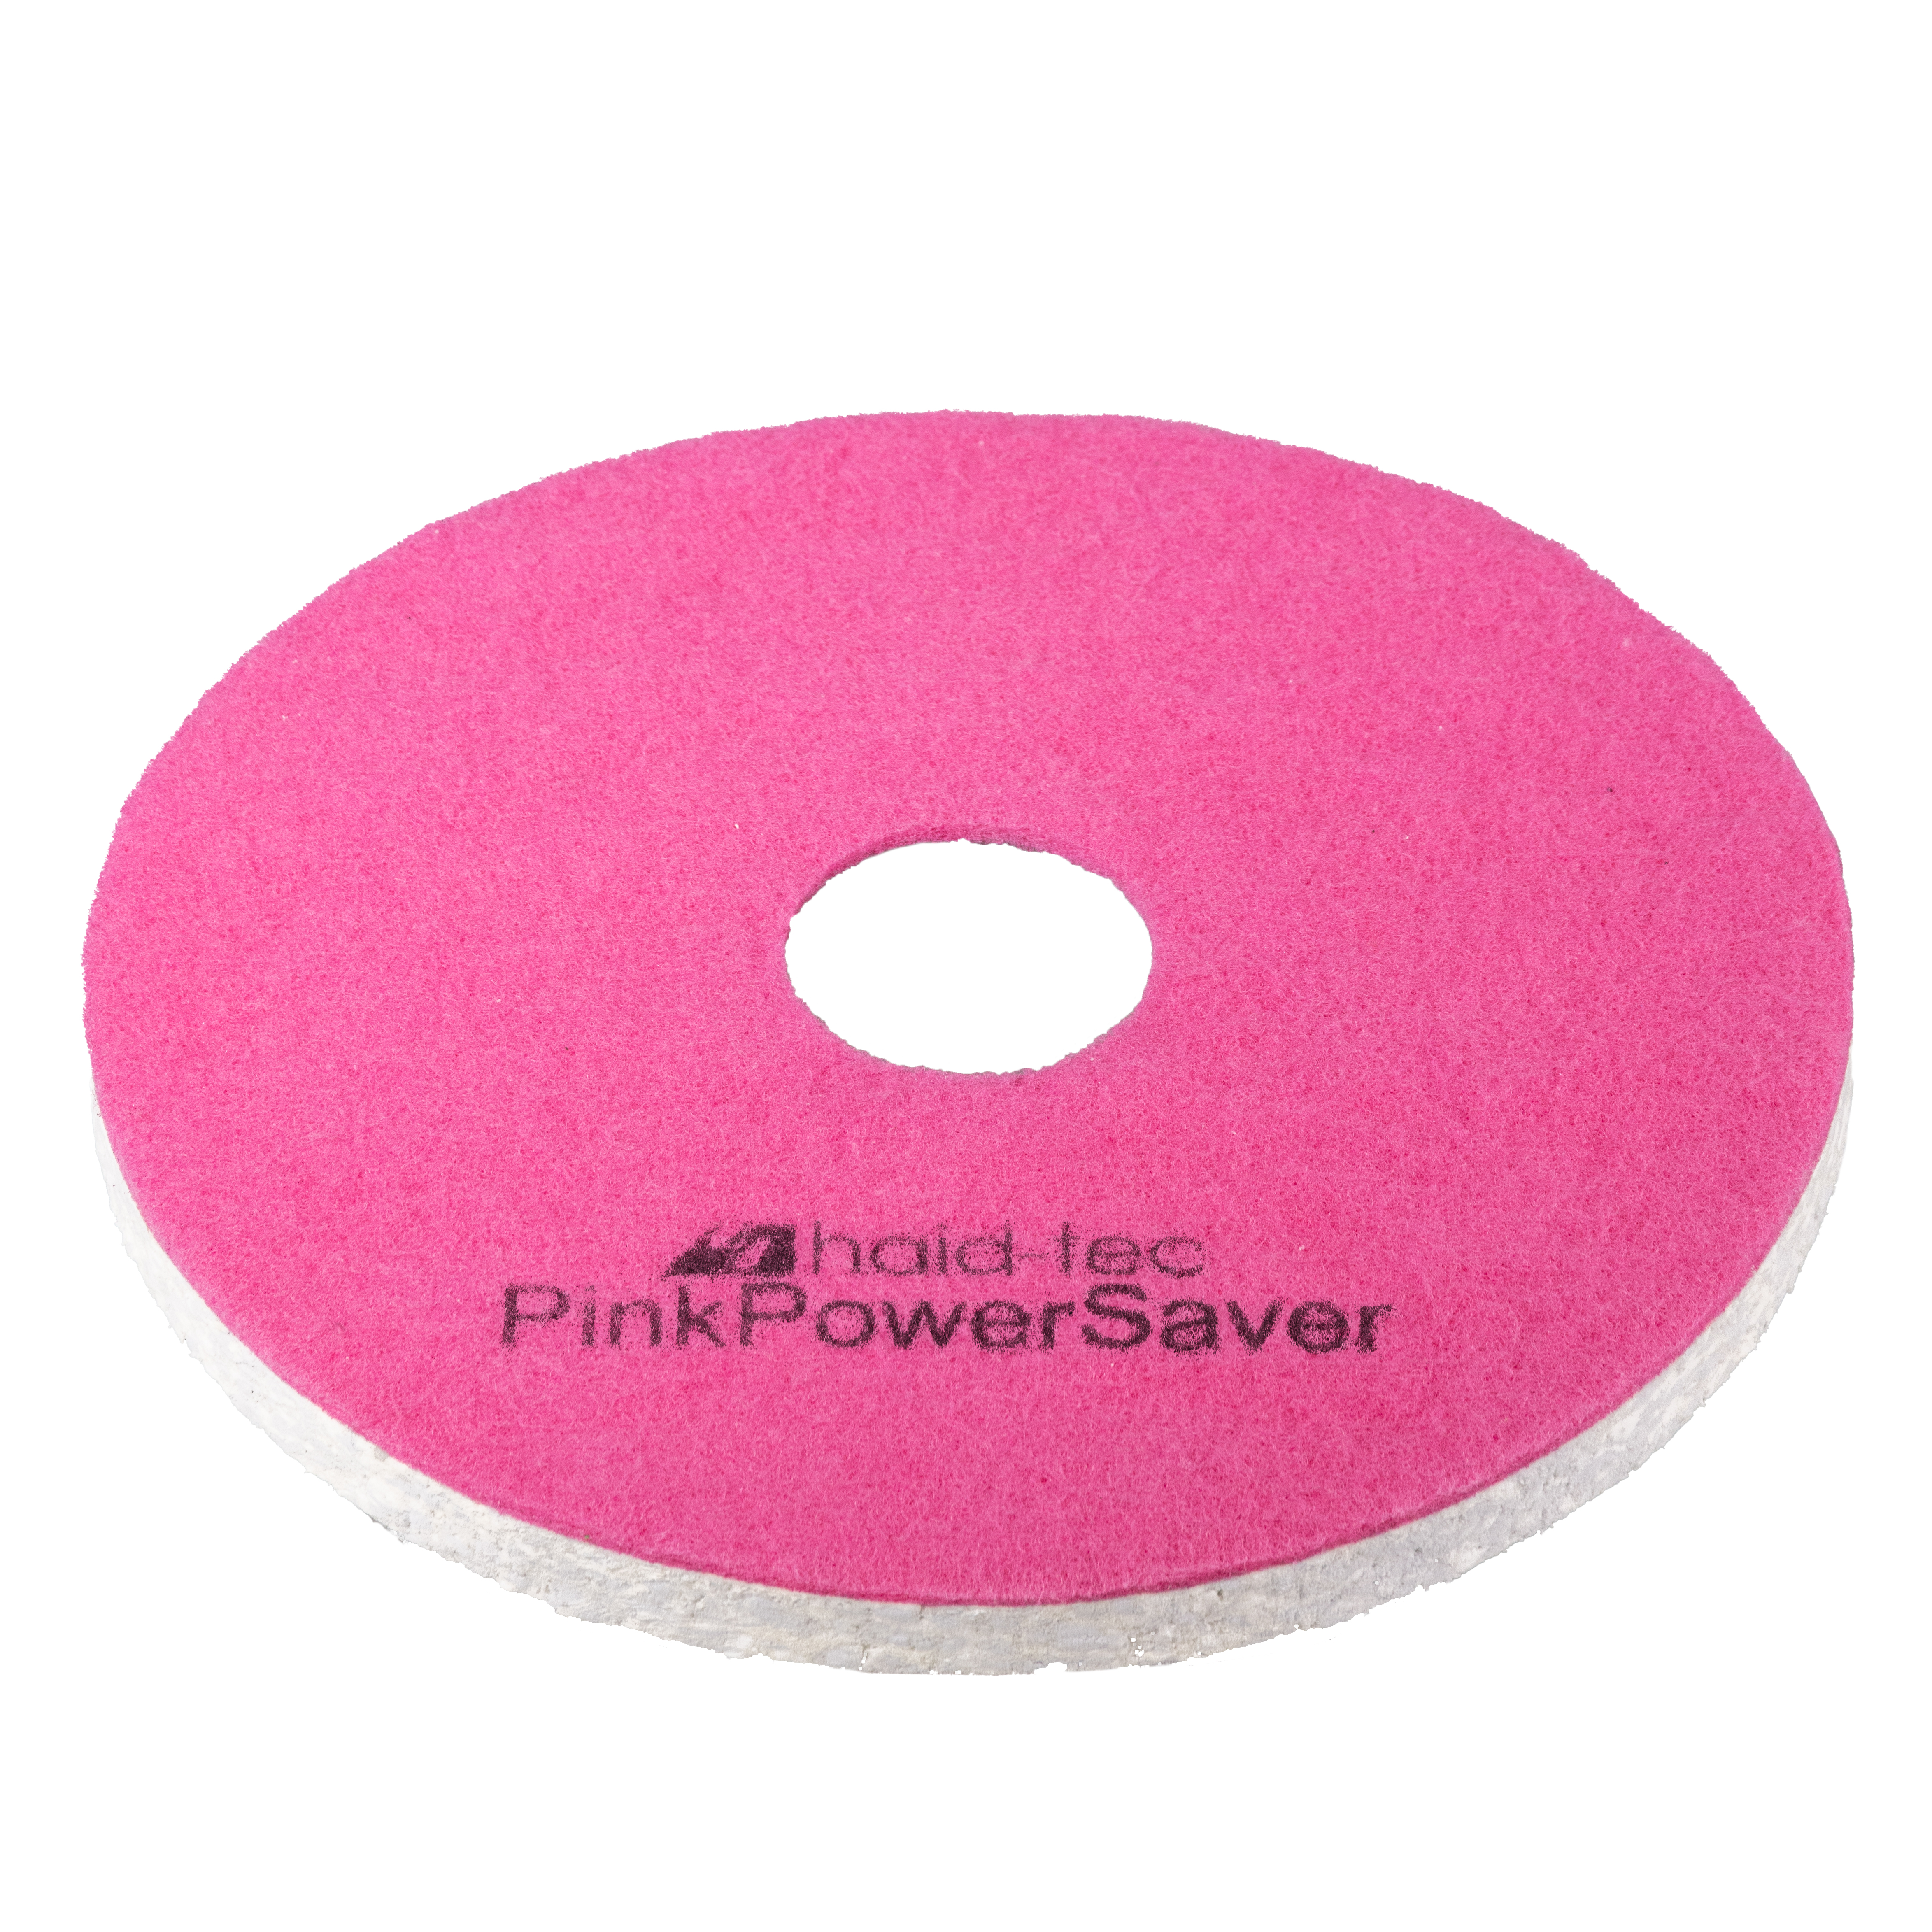 PinkPowerSaver Pad 16inch/406mm for scrubber dryer - melamine pad for intensive and maintenance cleaning